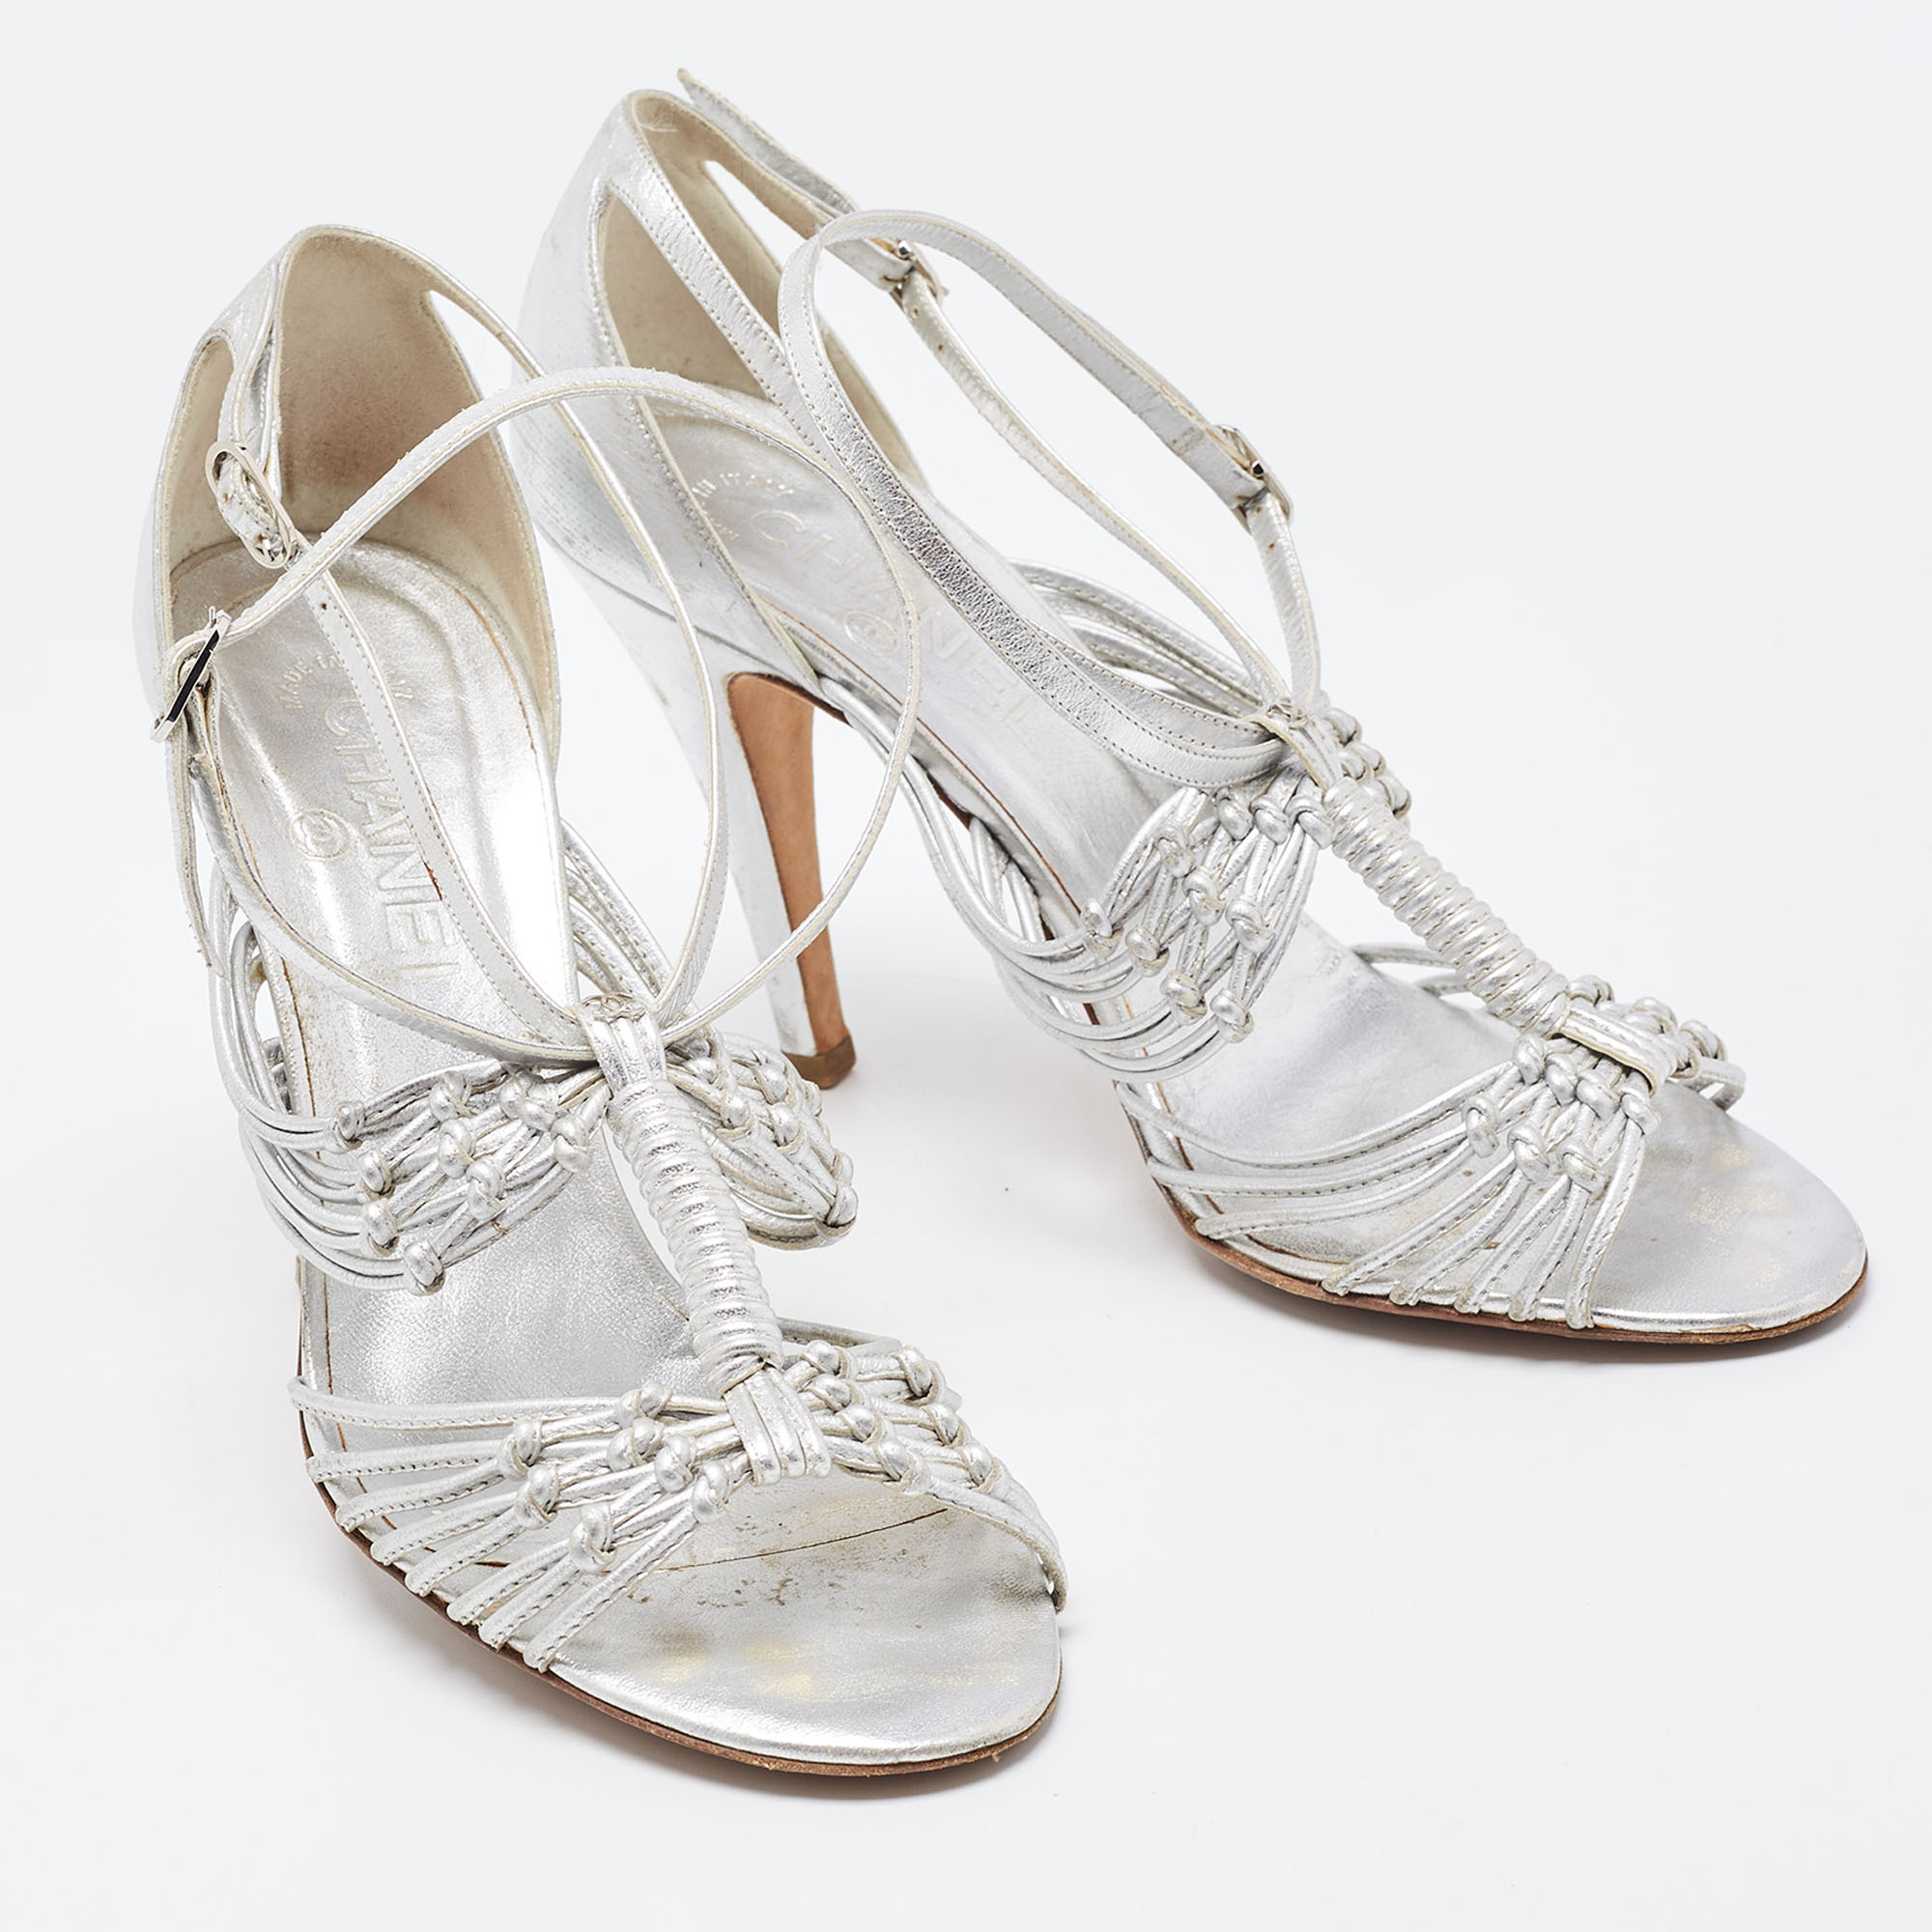 Chanel Silver Knotted Leather CC Ankle Strap Sandals 38.5